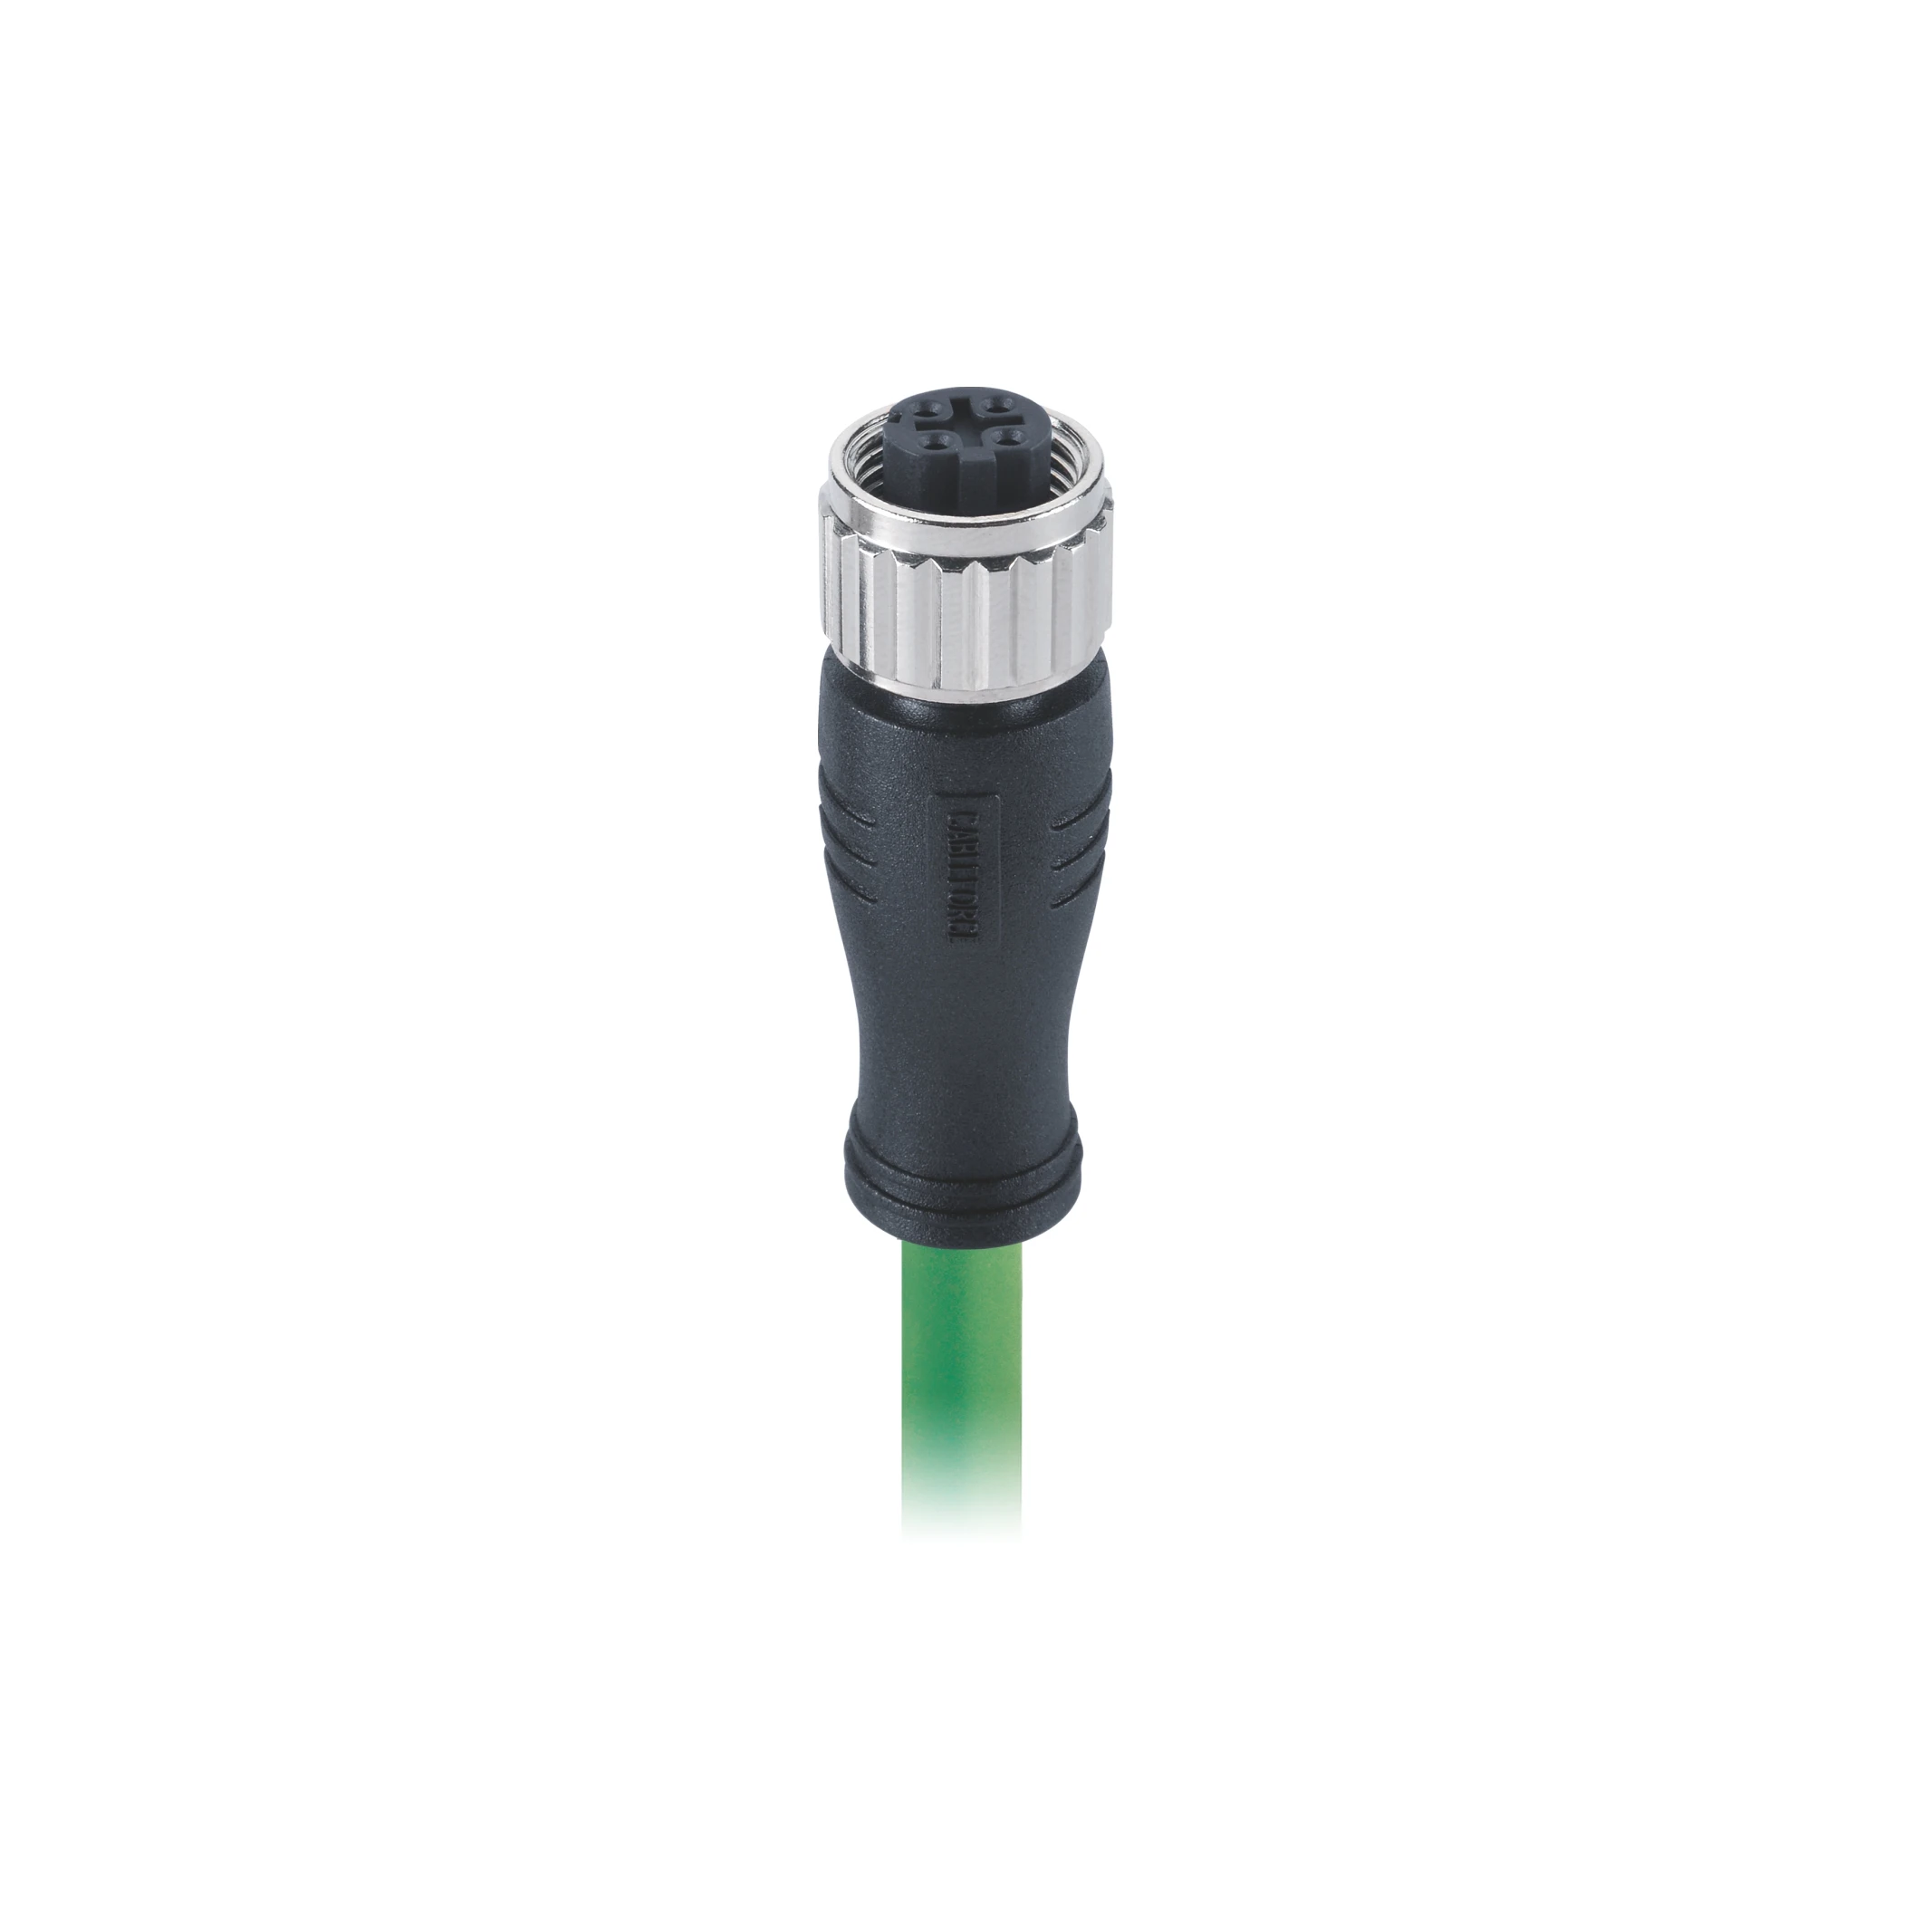 ProfiNet cable connector M12 D Coding connector female plug 4pin shielded molded 2 Pairs etherNet green cable